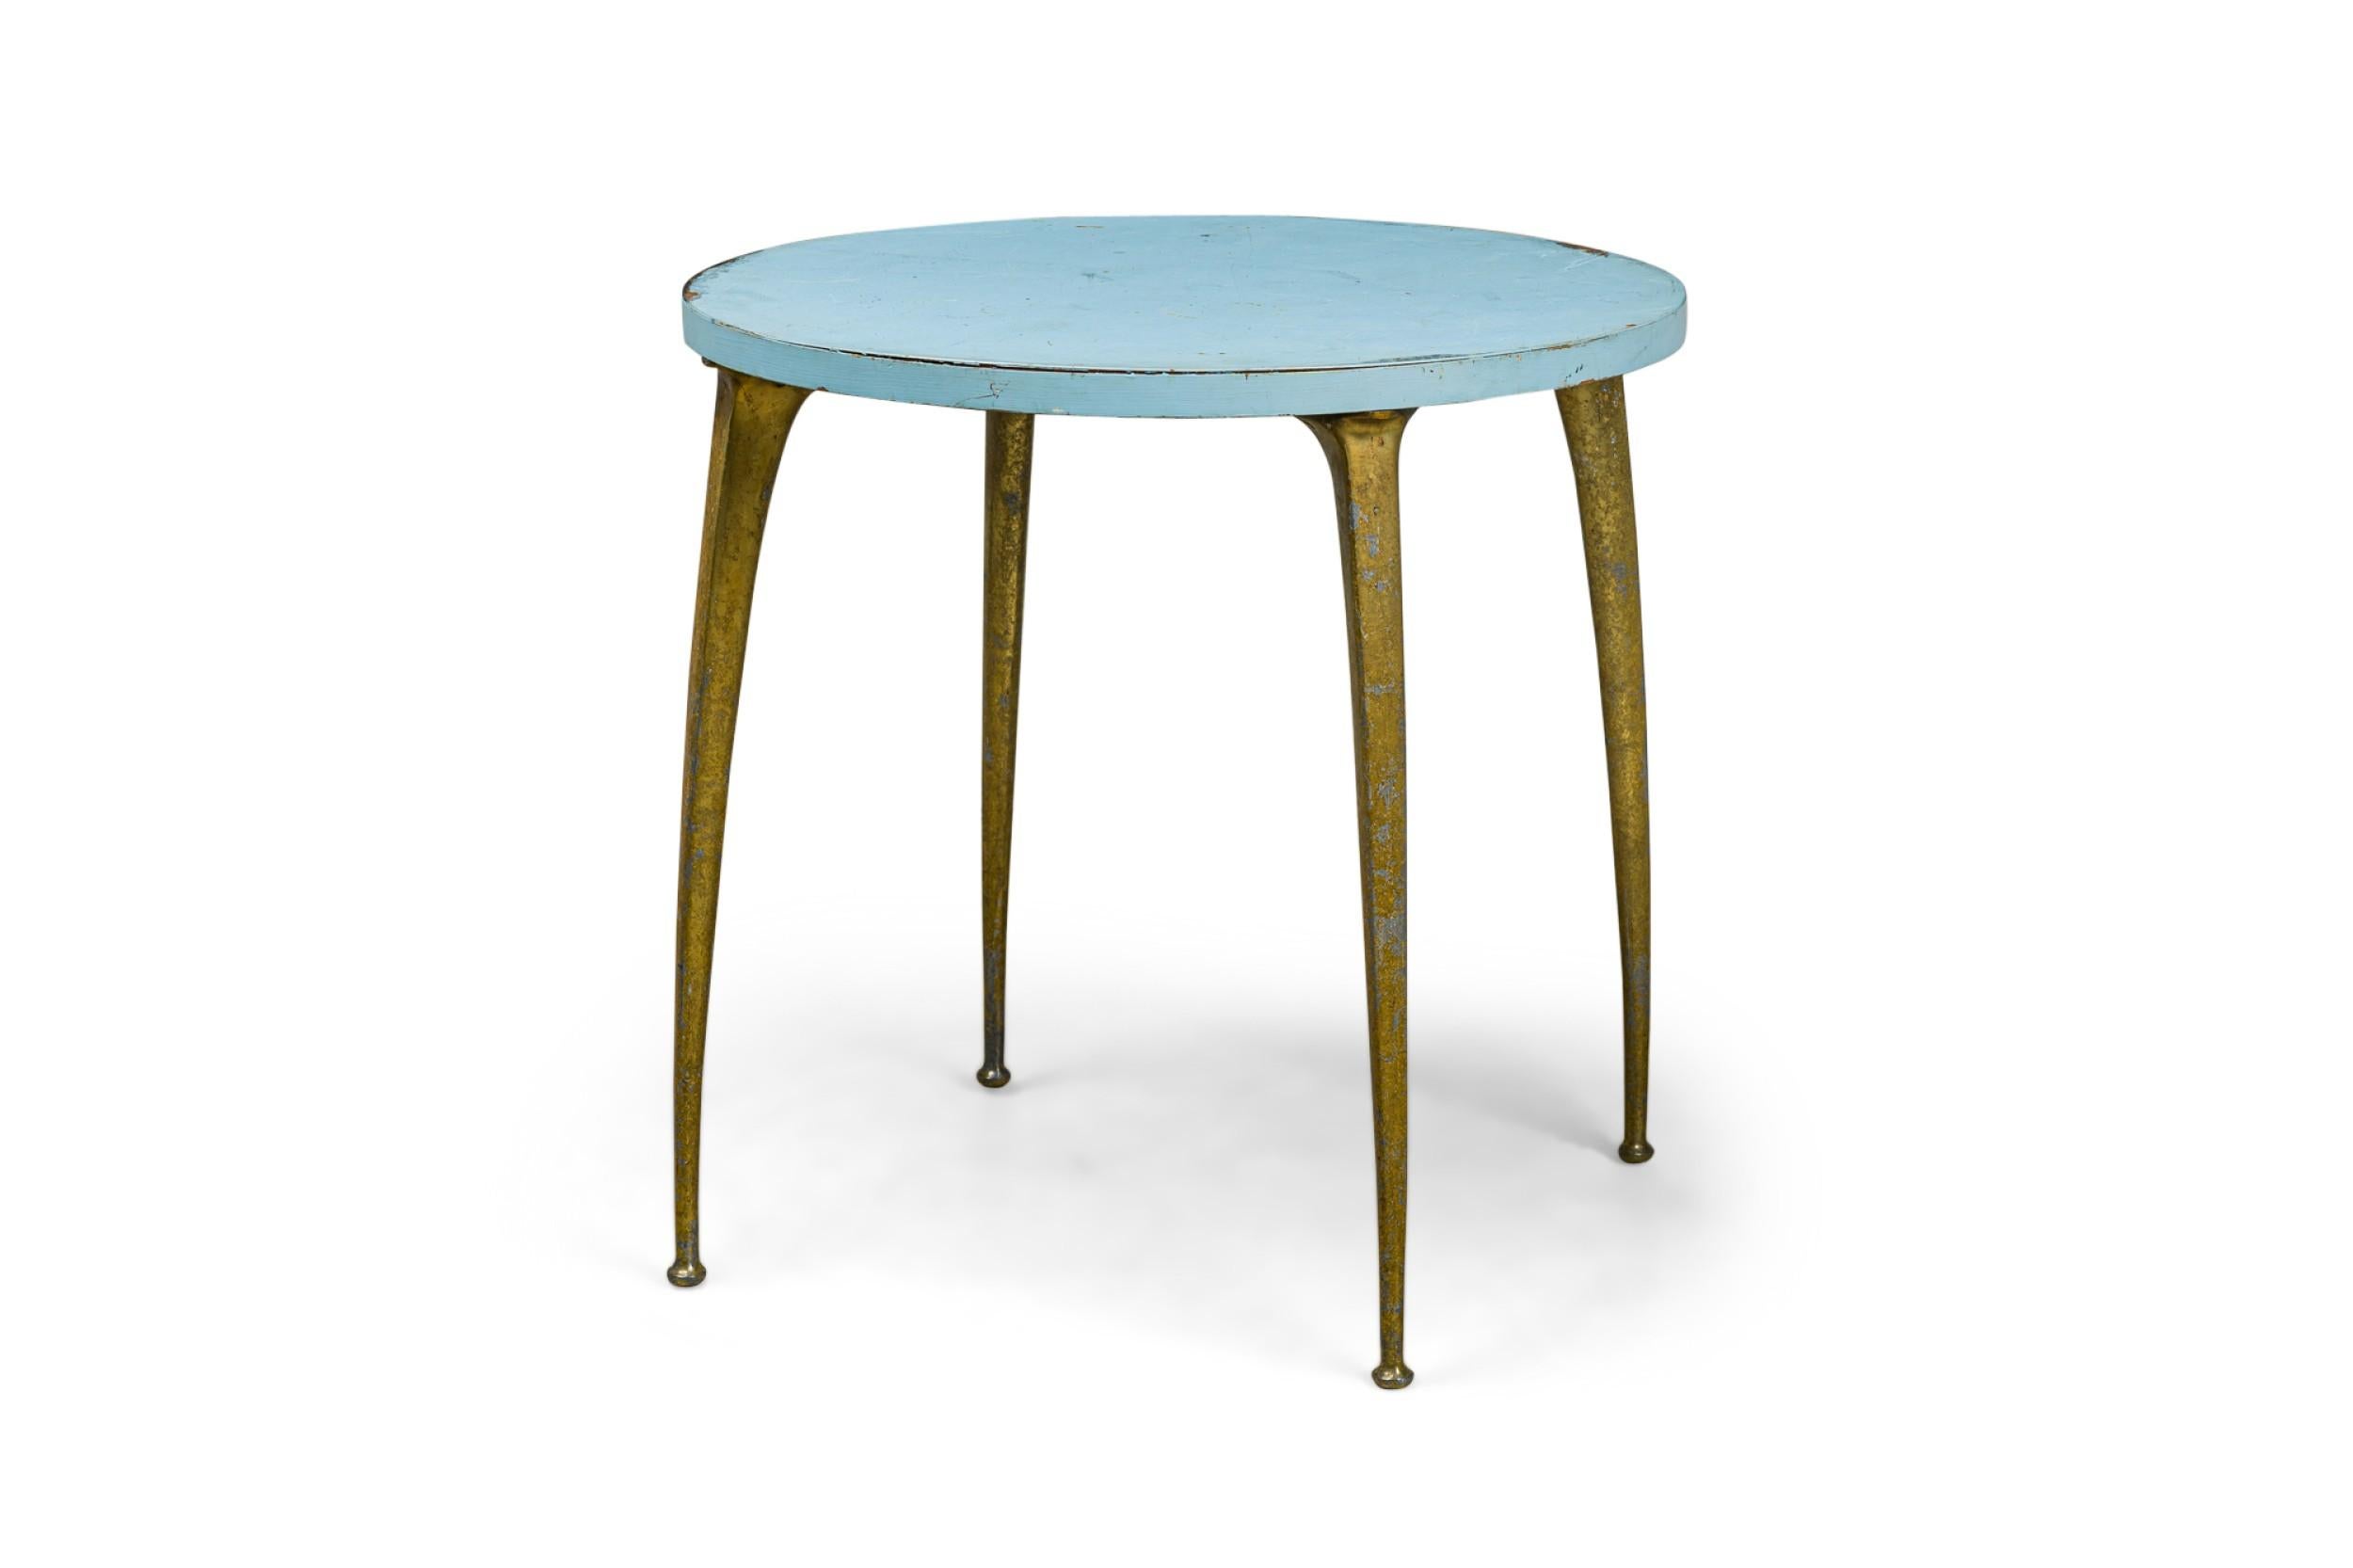 Painted Italian Modern Enameled Wood & Brass Center / Breakfast Table, Style of Ponti For Sale